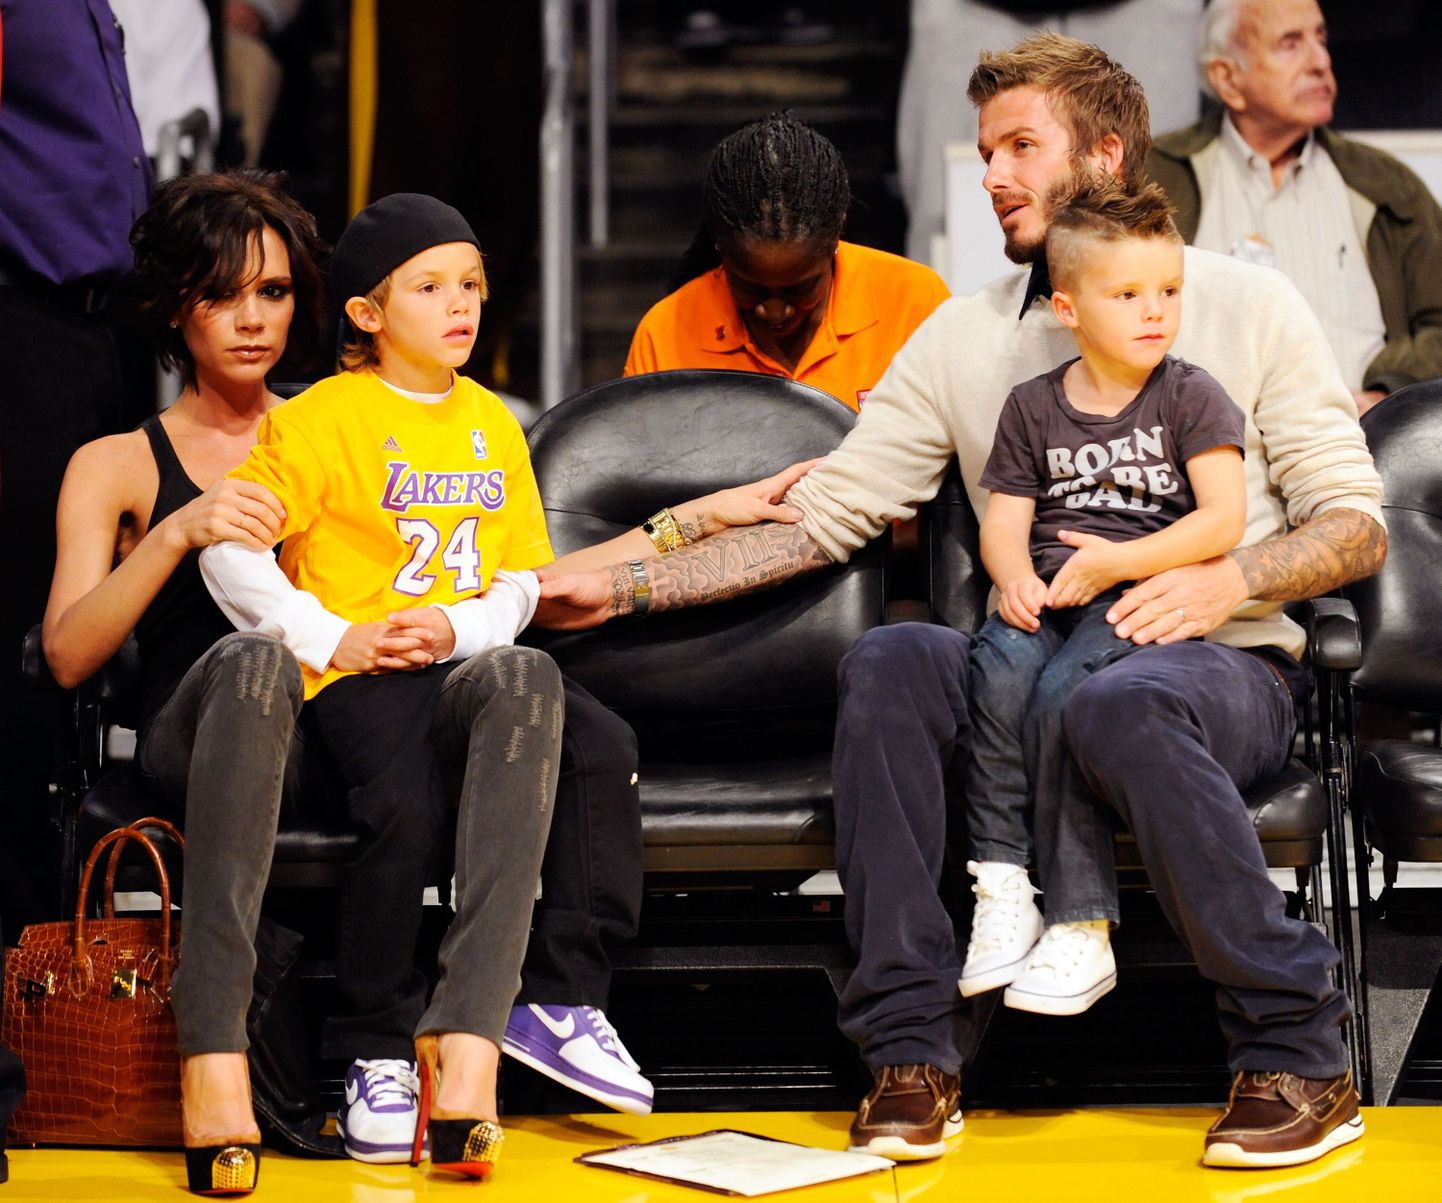 LOS ANGELES, CA - OCTOBER 30: David Beckham and his wife Victoria follow the action between the Los Angeles Lakers and the Dallas Mavericks along with their children Cruz (R) and Romeo (L) at Staples Center on October 30, 2009 in Los Angeles, California. NOTE TO USER: User expressly acknowledges and agrees that, by downloading and/or using this Photograph, user is consenting to the terms and conditions of the Getty Images License Agreement.   Kevork Djansezian/Getty Images/AFP